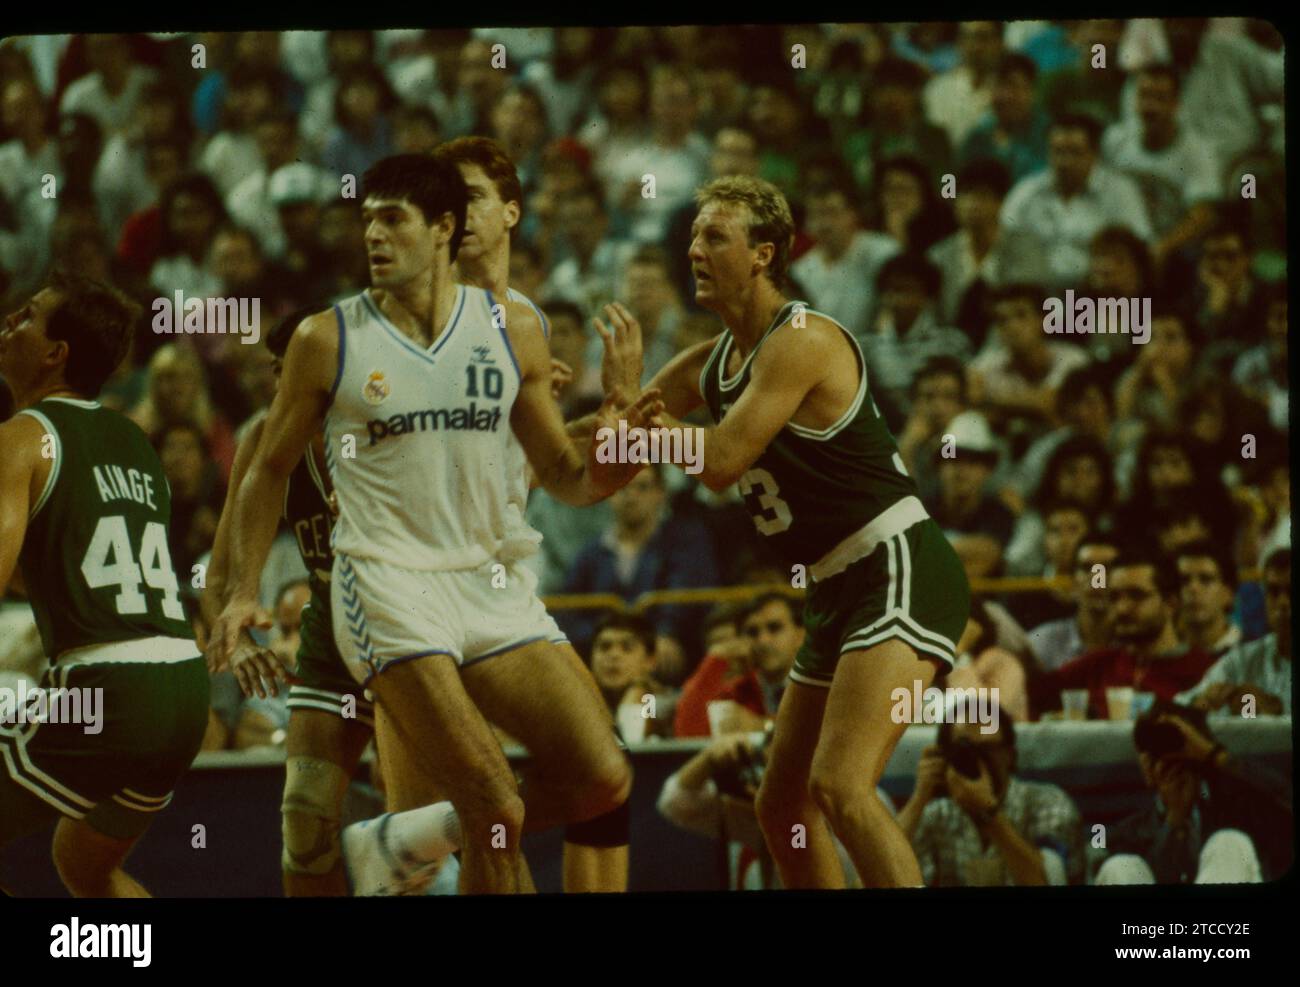 Madrid, 10/24/1988. Sport's palace. Open McDonalds basketball. Match between Real Madrid and the Boston Celtics that ended with the result of 111 to 96, with a North American victory. Credit: Album / Archivo ABC / Miguel Berrocal Stock Photo